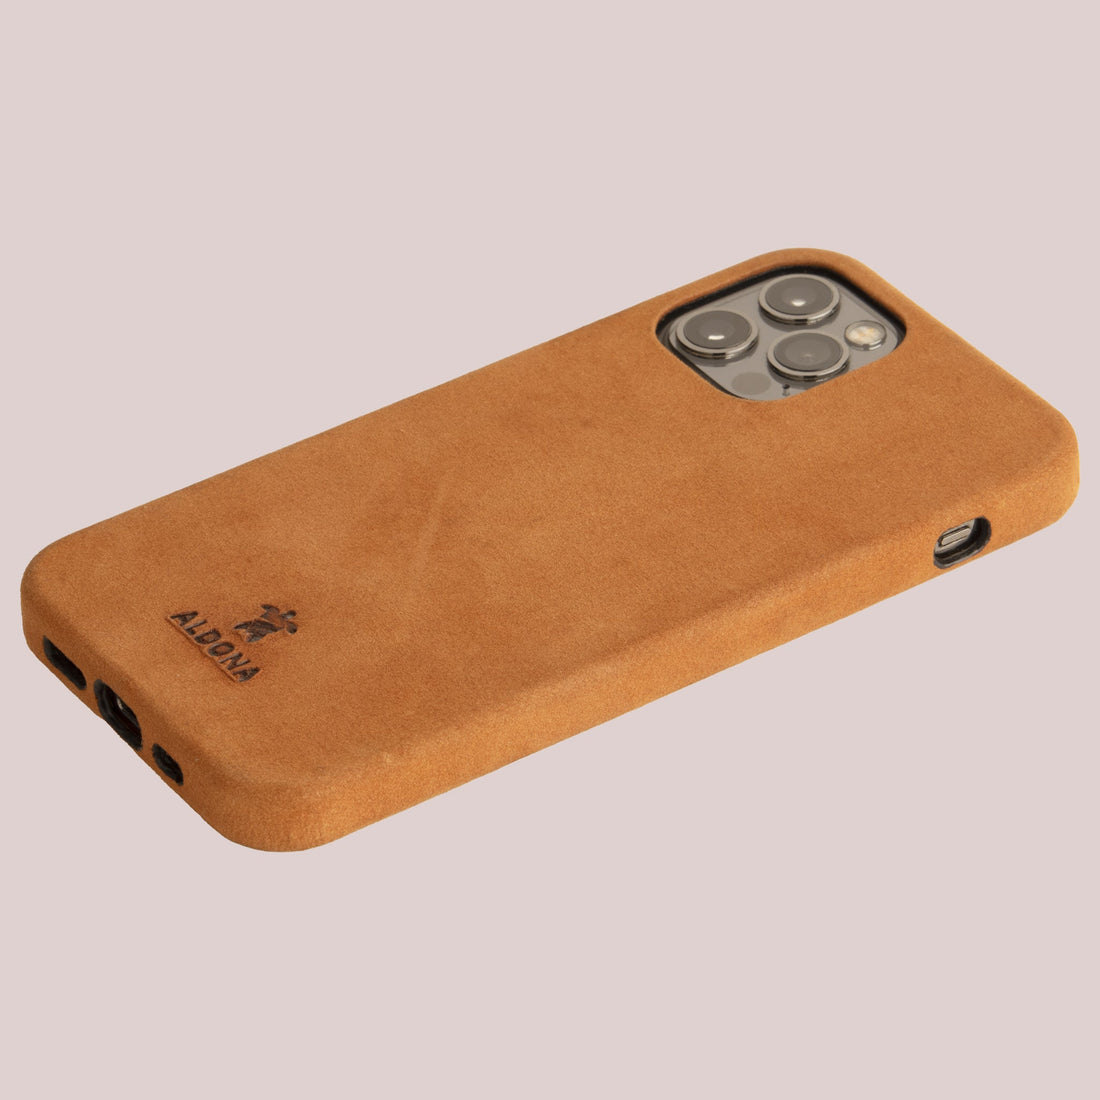 Kalon Case for iPhone 14 Pro with MagSafe Compatibility - Cognac